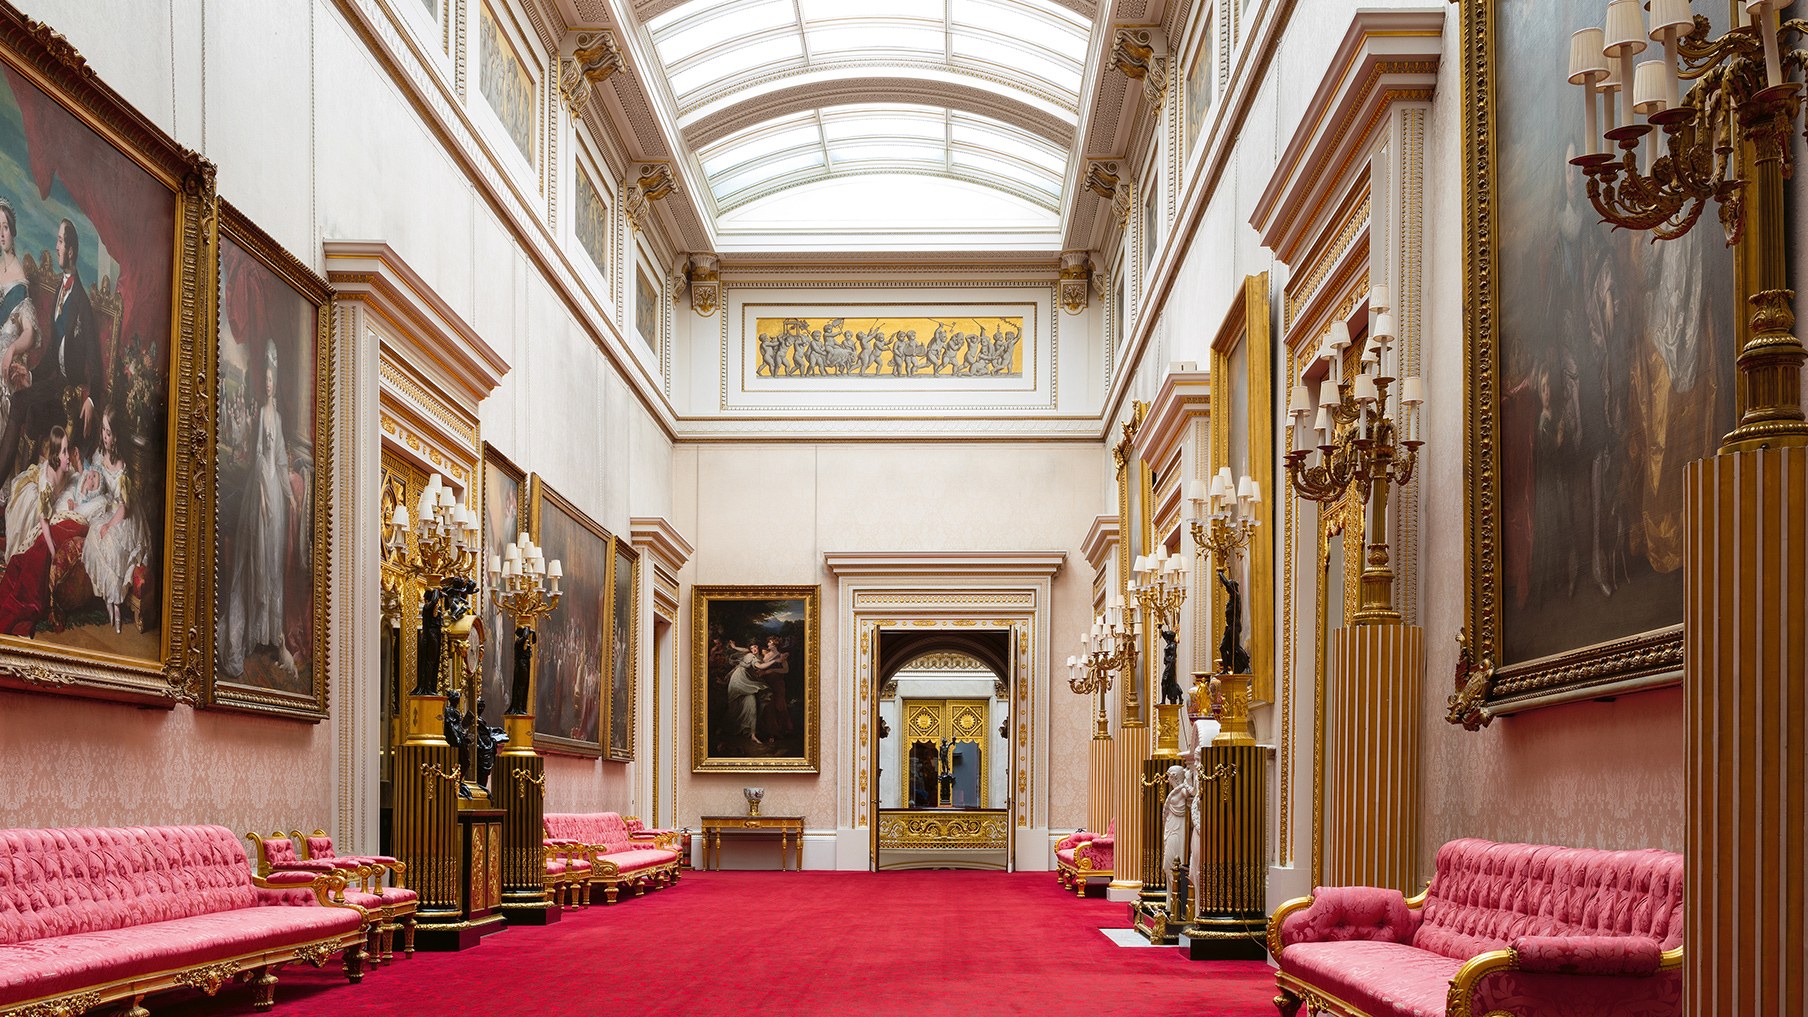 Buckingham palace rooms pictures